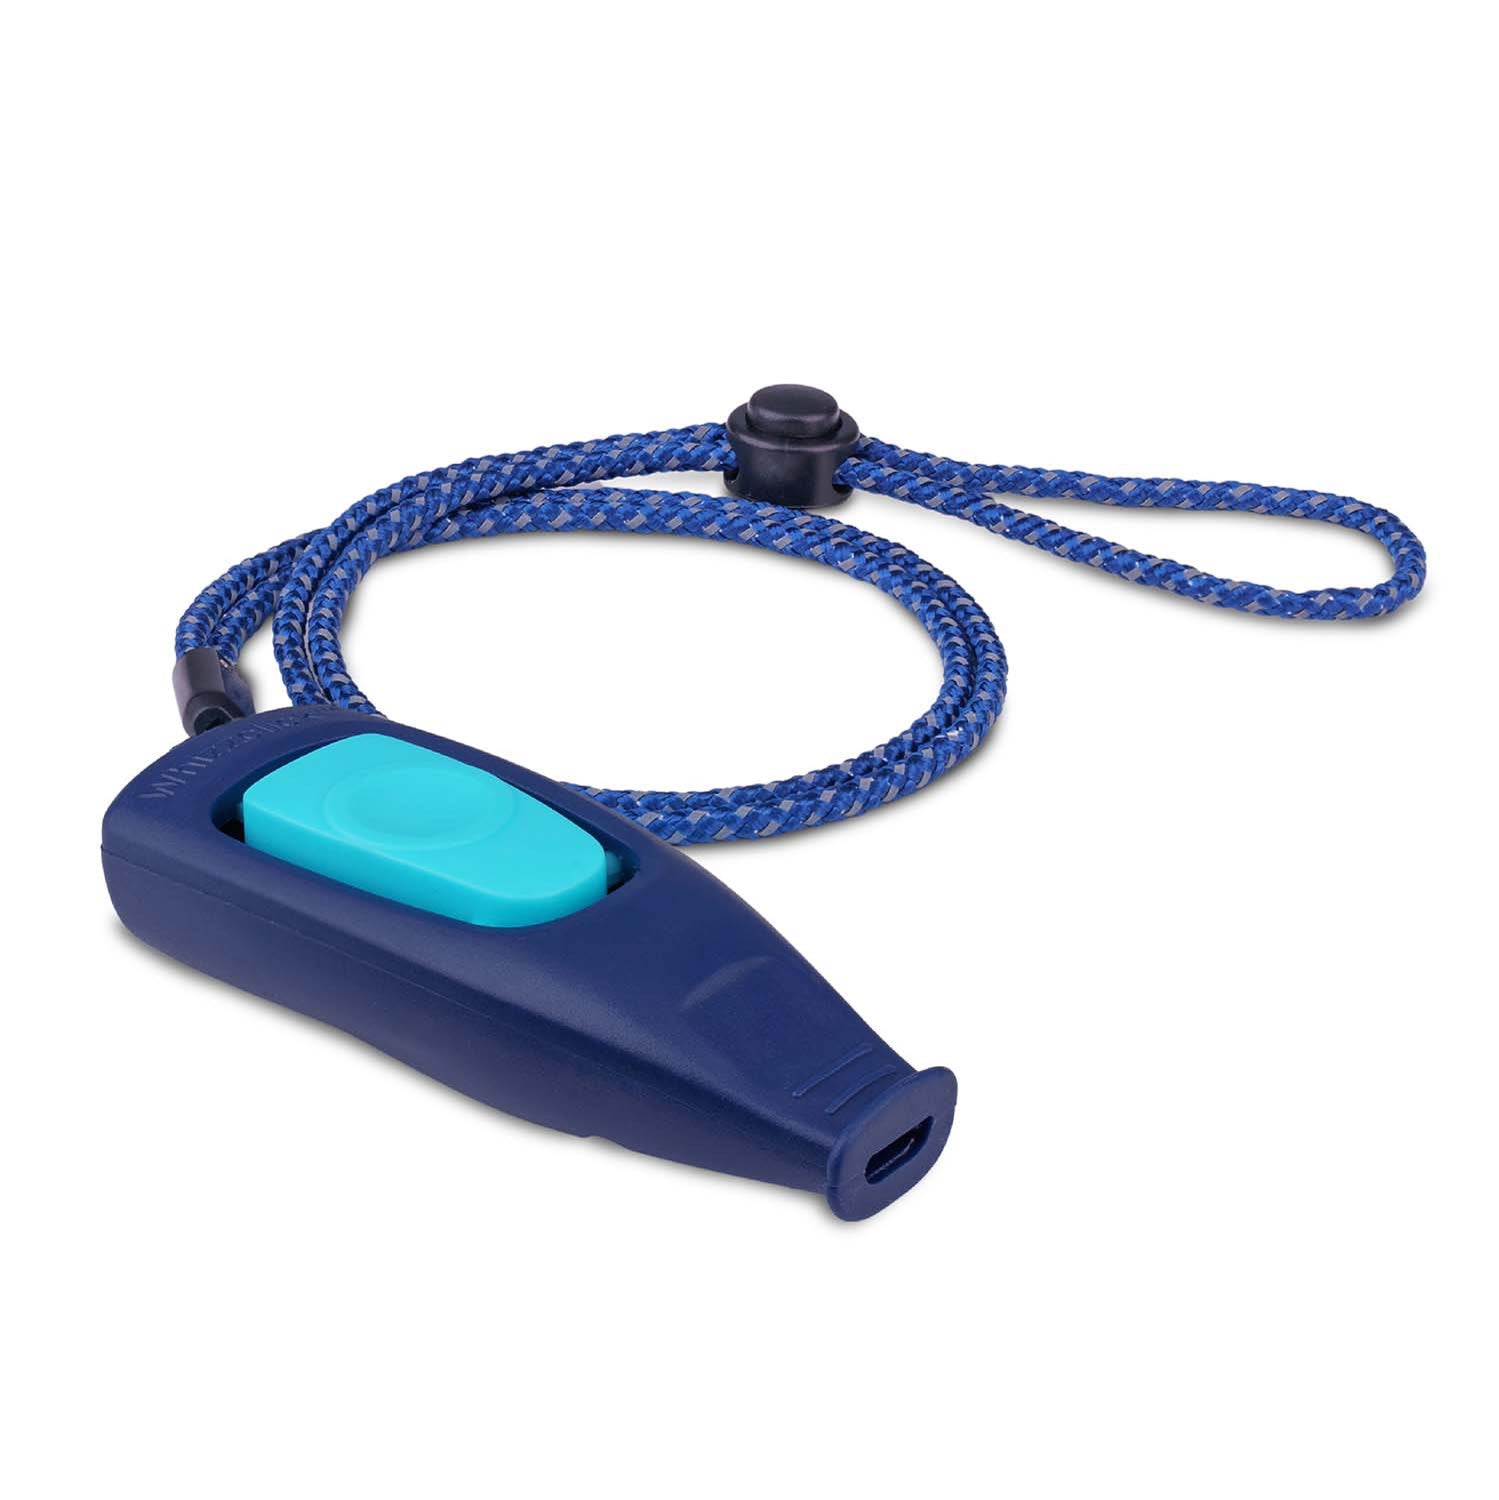 Coachi Whizzclick 2-In-1 Combined Clicker & Whistle